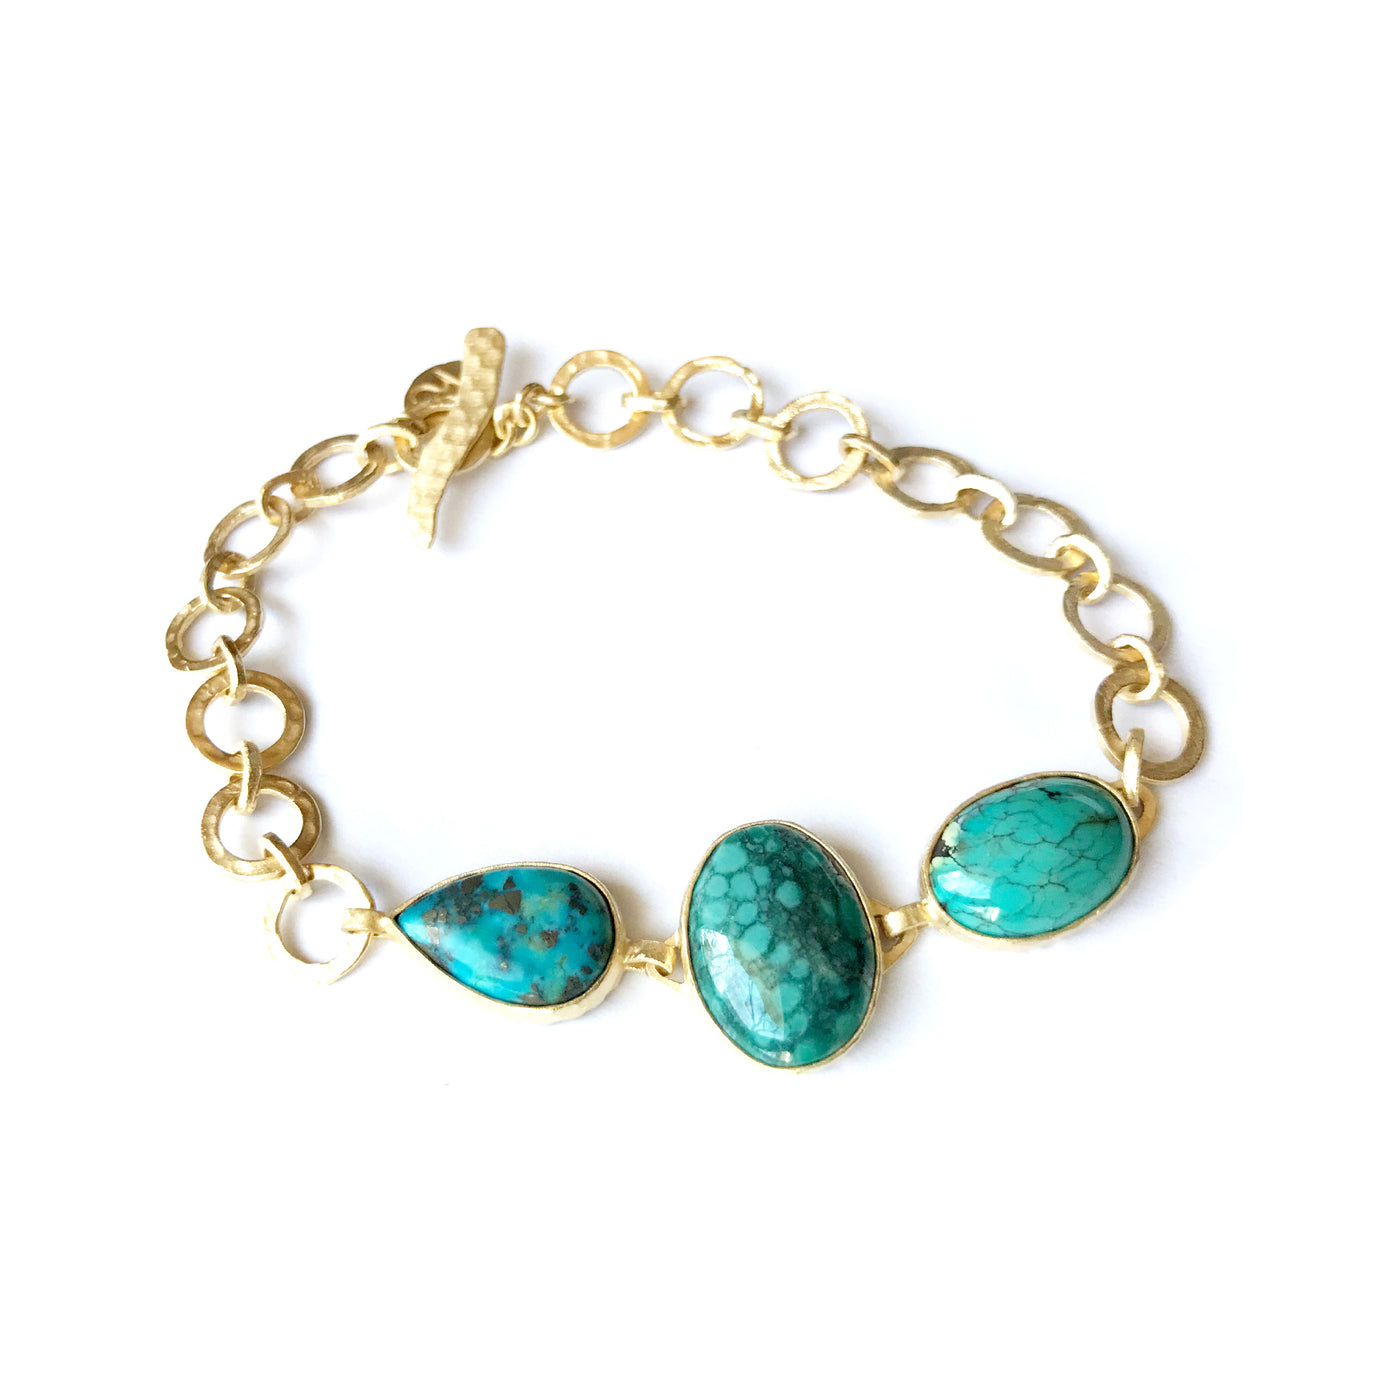 Triple Turquoise hand made chain bracelet